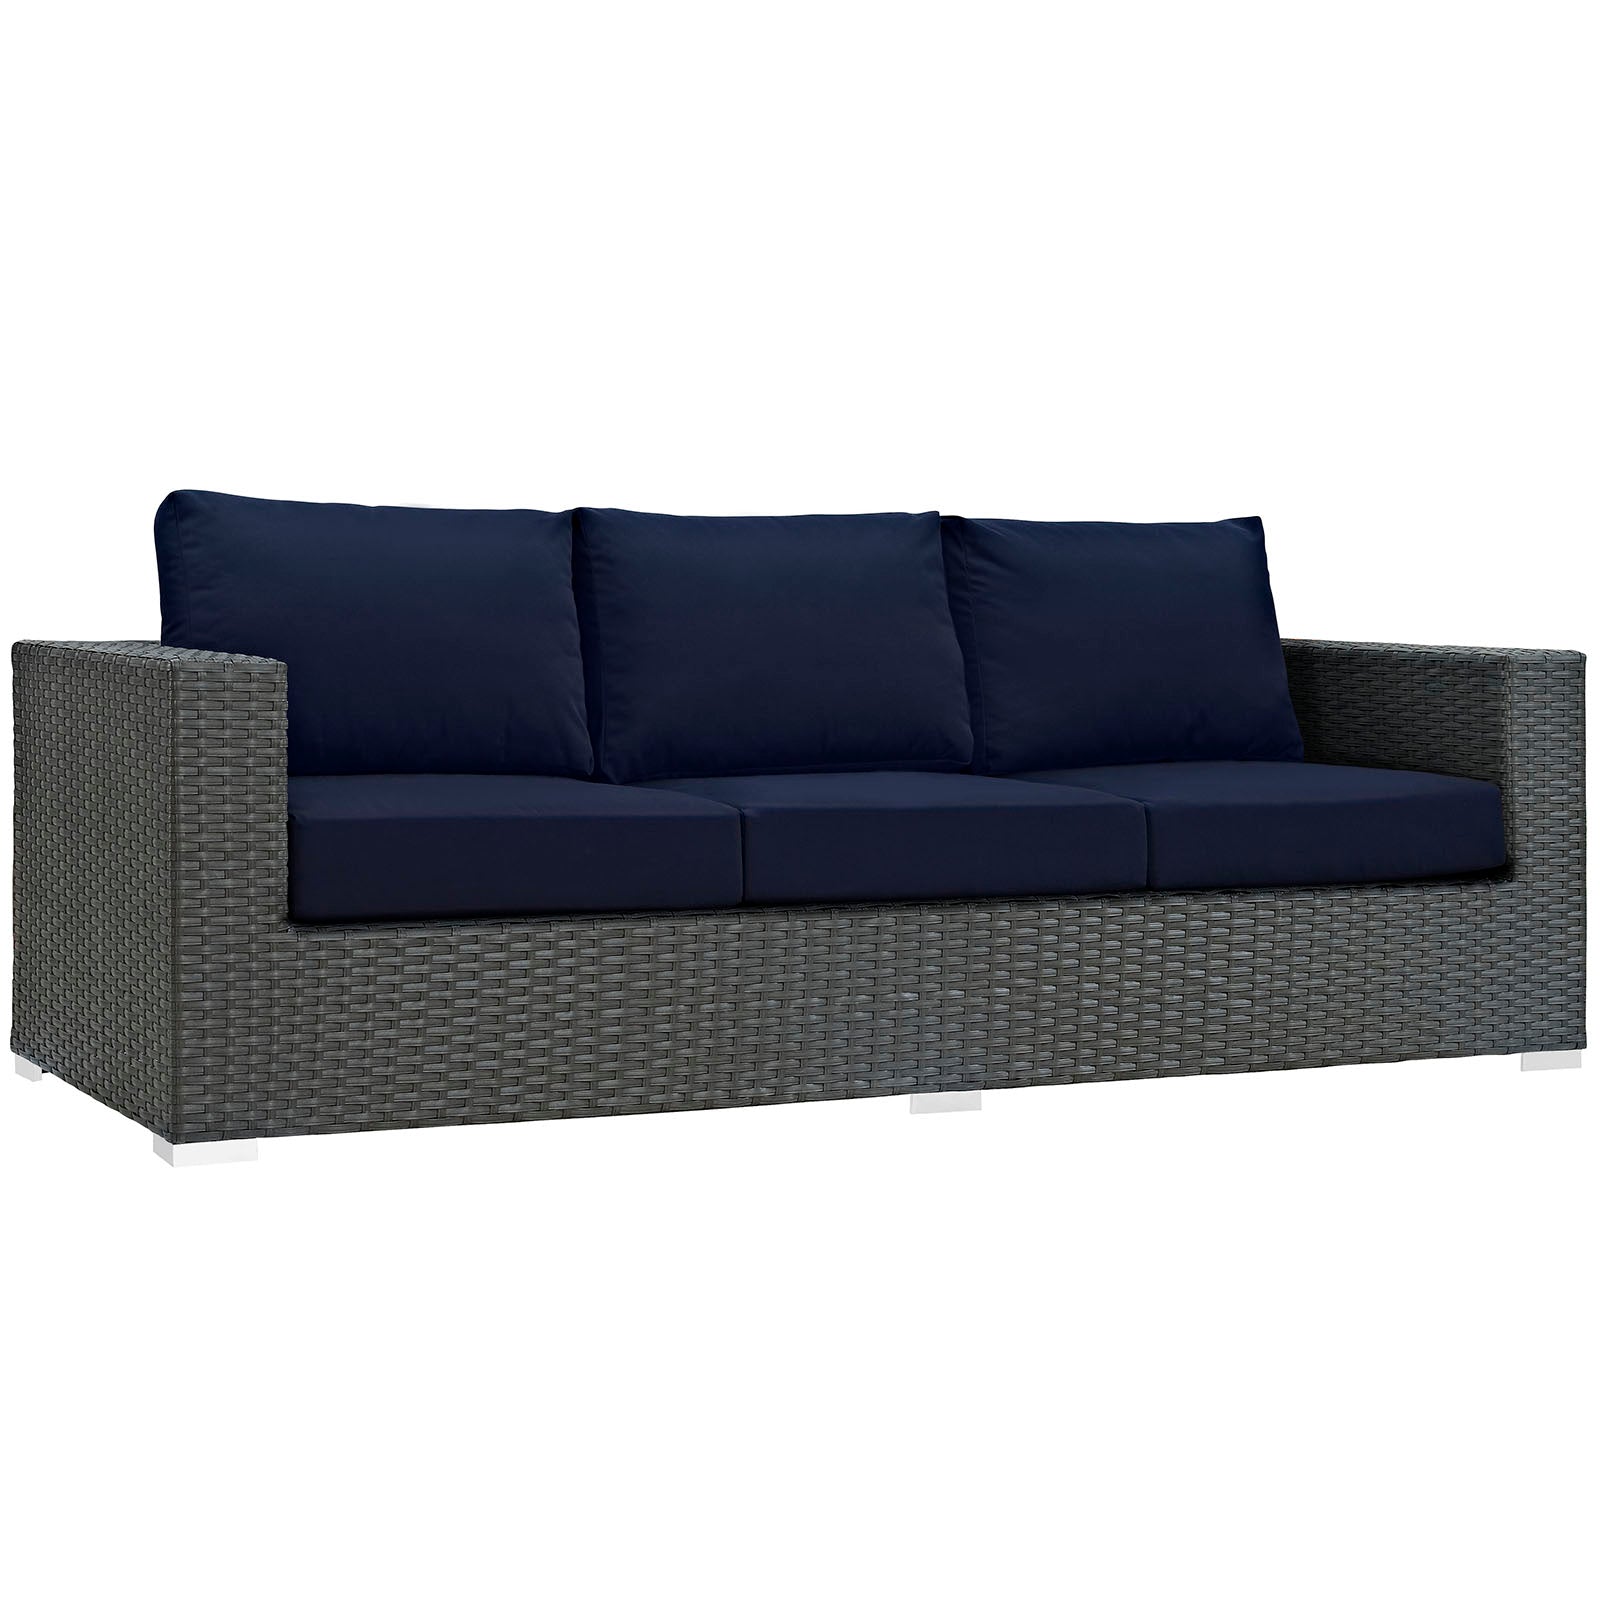 Sojourn 3 Piece Outdoor Patio Sunbrella® Sectional Set - East Shore Modern Home Furnishings